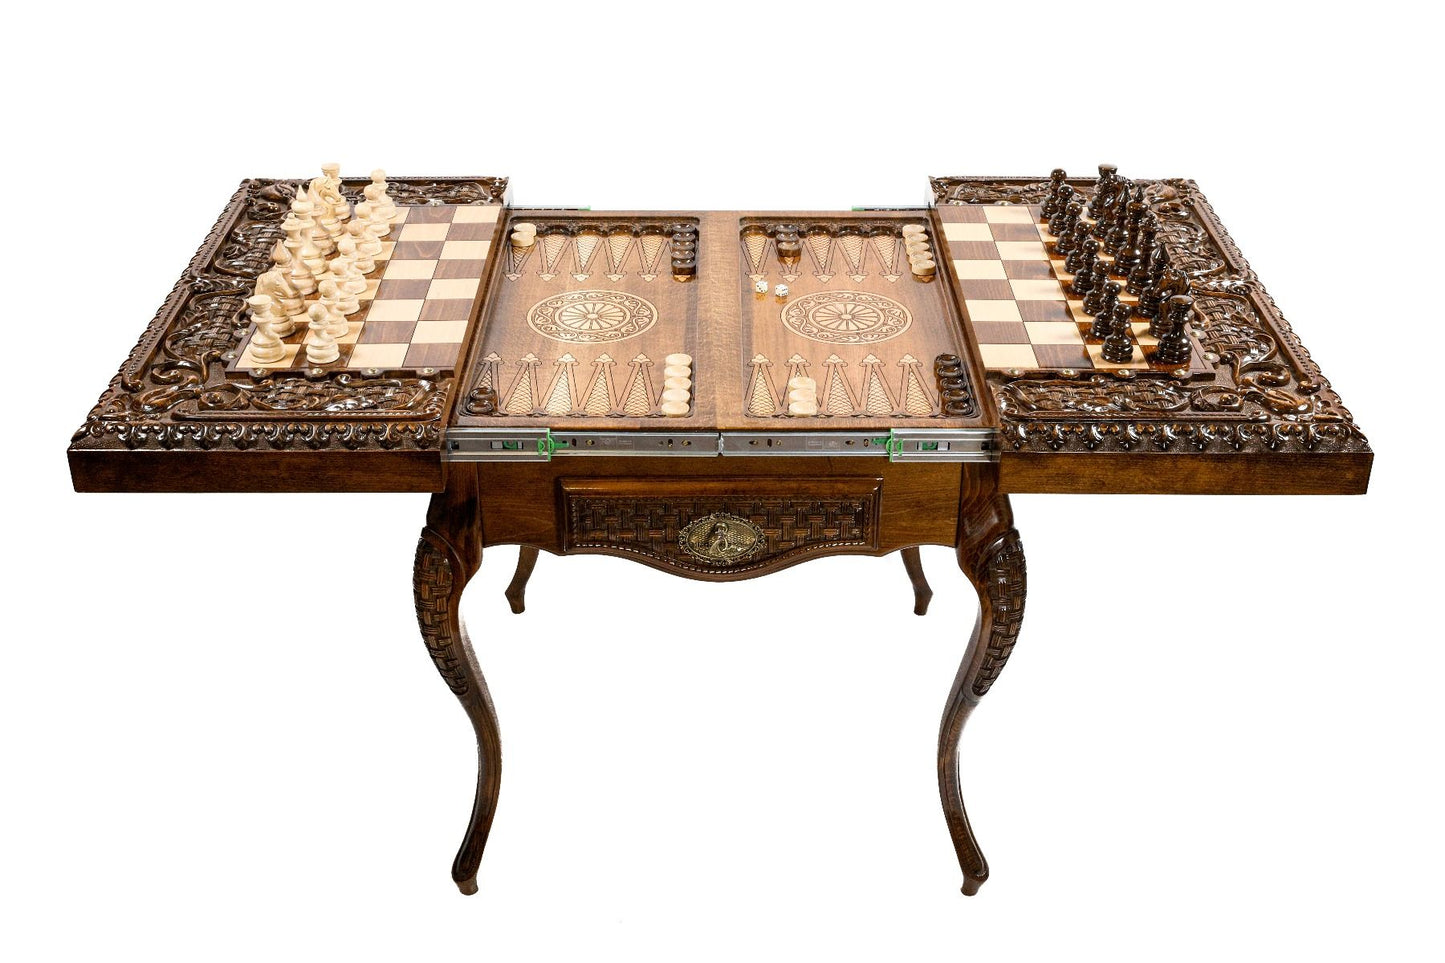 Full view of the 'Opulent Dual-Play' luxury chess and backgammon table set in a lavish interior, ideal for sophisticated gaming.